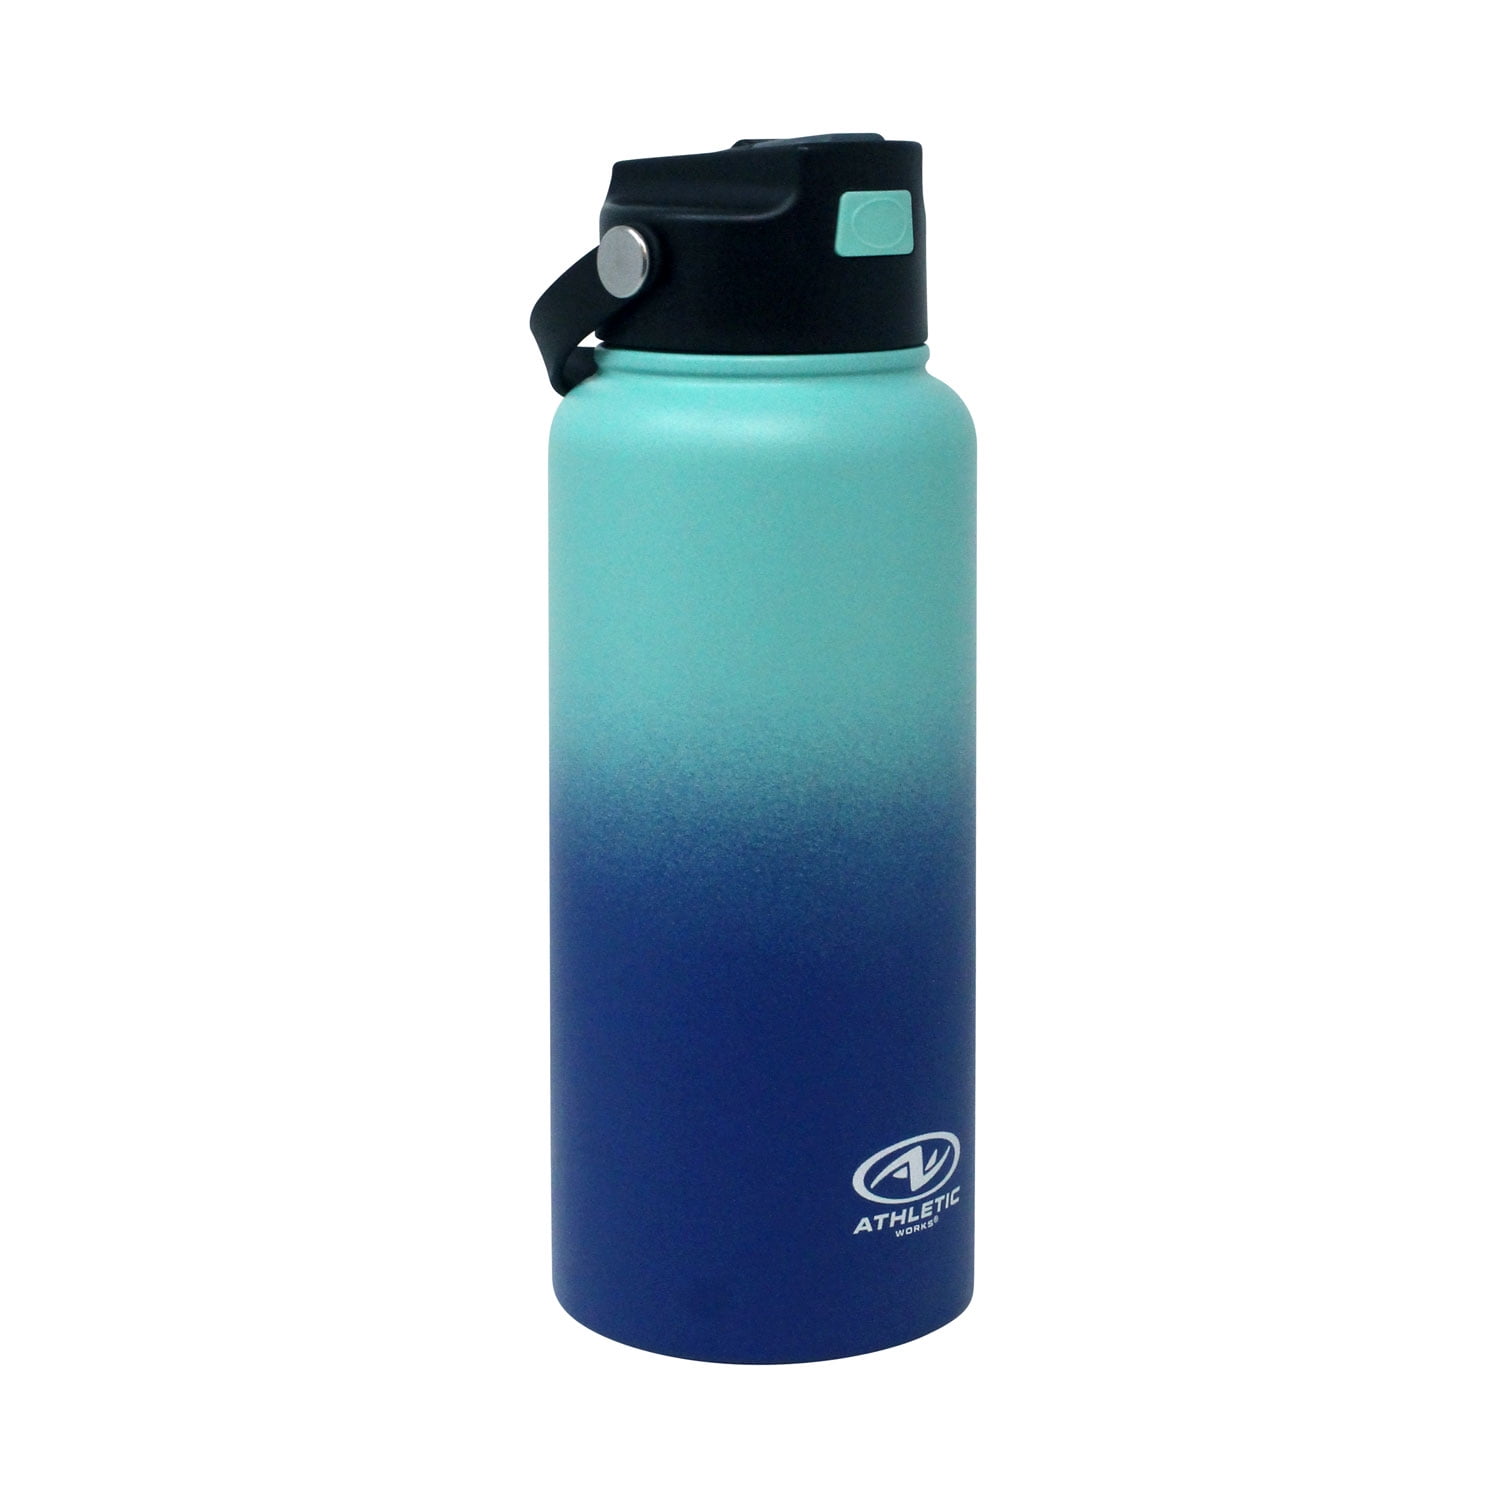 Active Tumbler Stainless Steel Water Bottle with Flip Spout